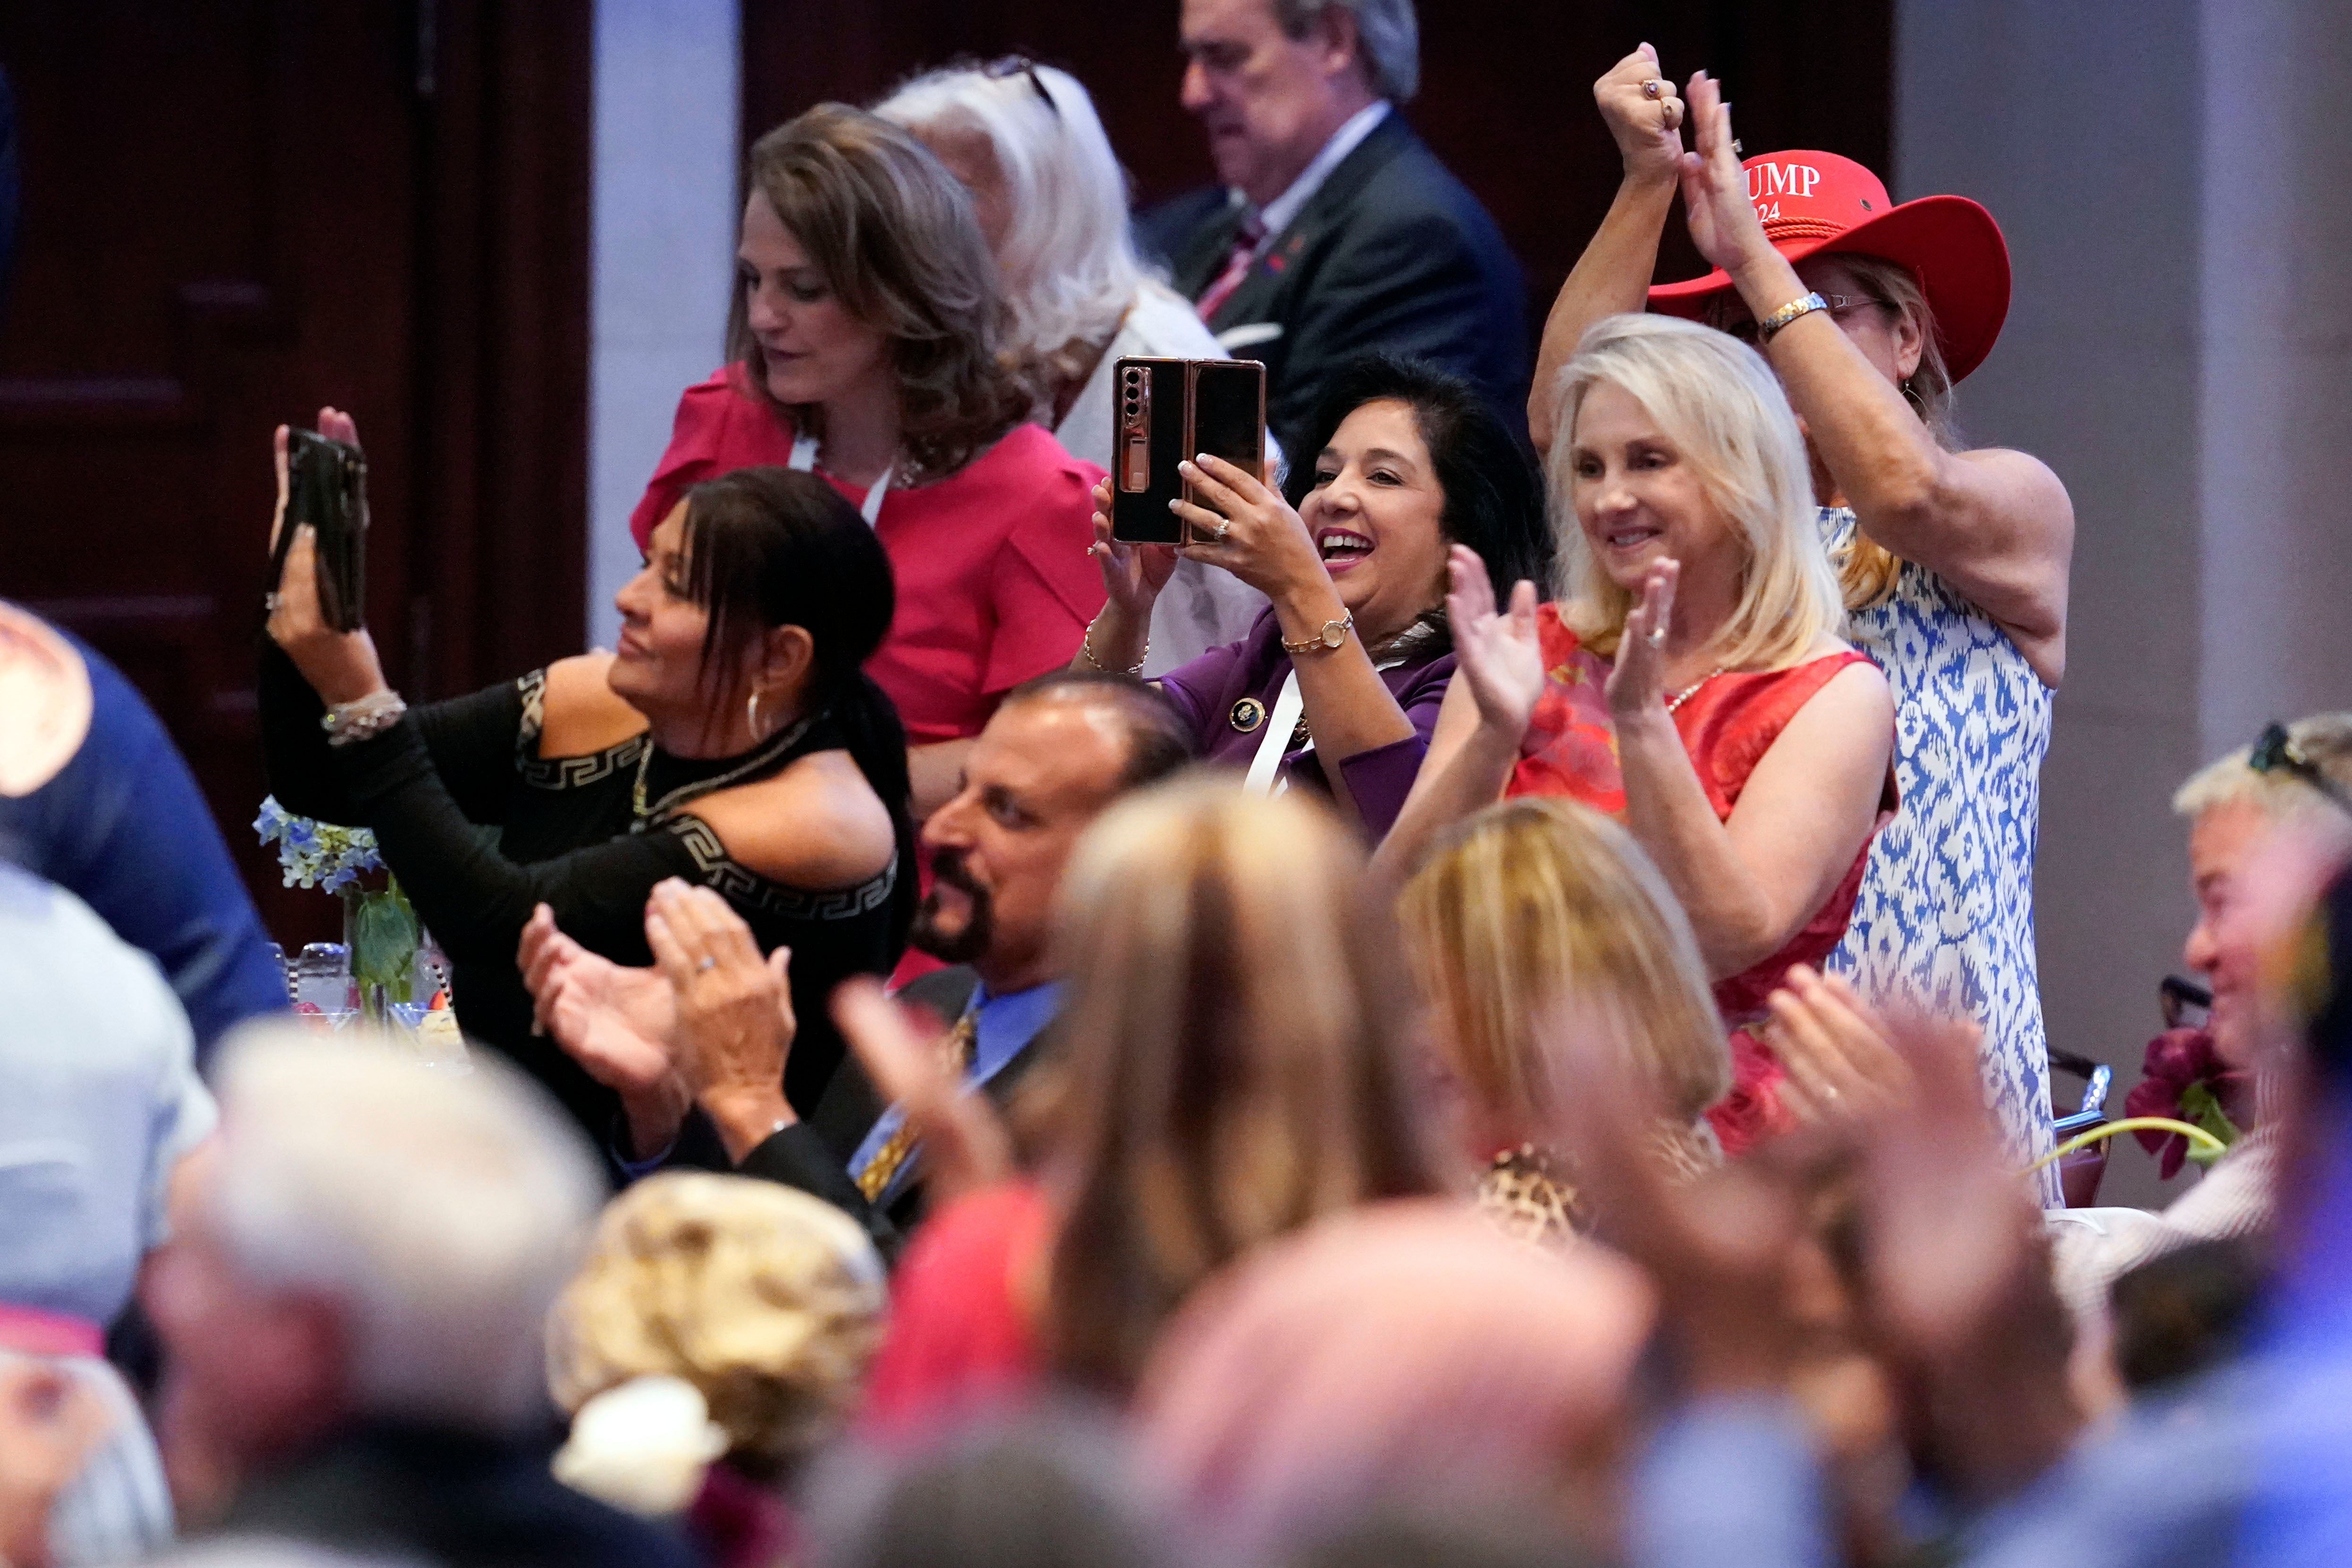 People cheer as former President Donald Trump speaks during the North Carolina Republican Party Convention in Greensboro, N.C., Saturday, June 10, 2023. (AP Photo/George Walker IV)